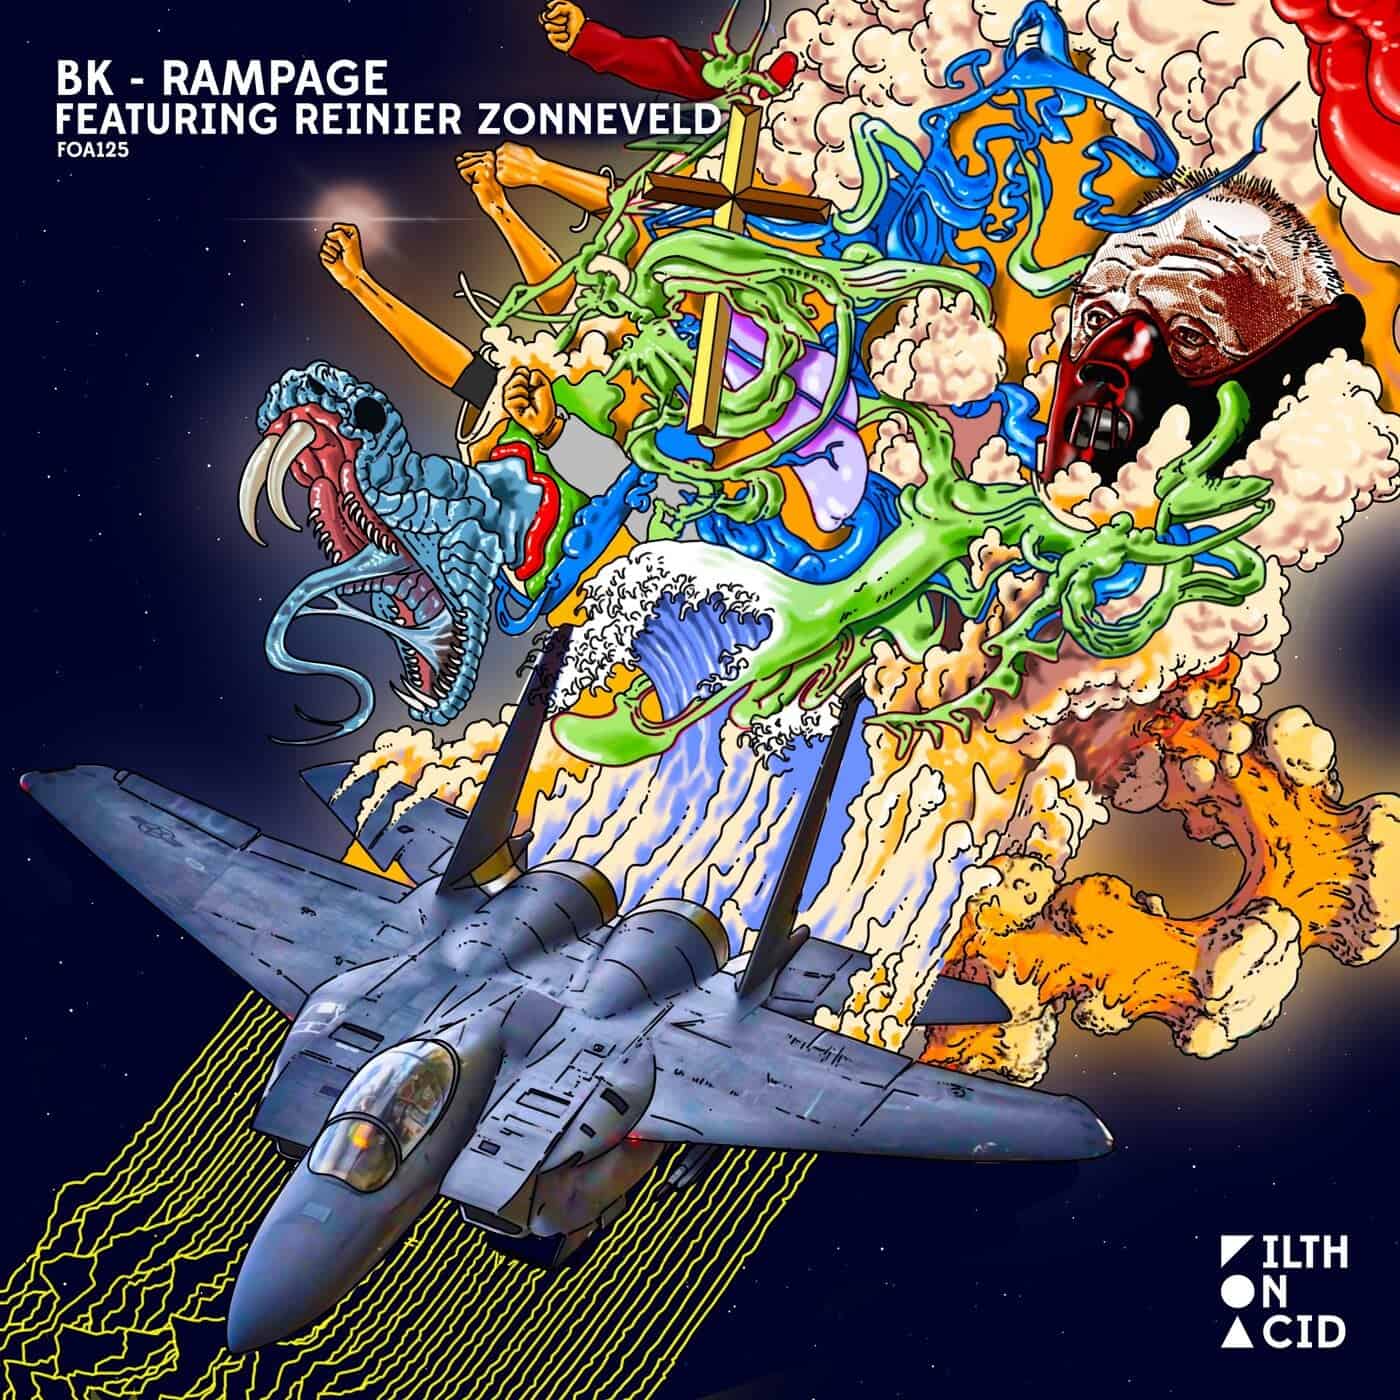 image cover: BK - Rampage / FOA125